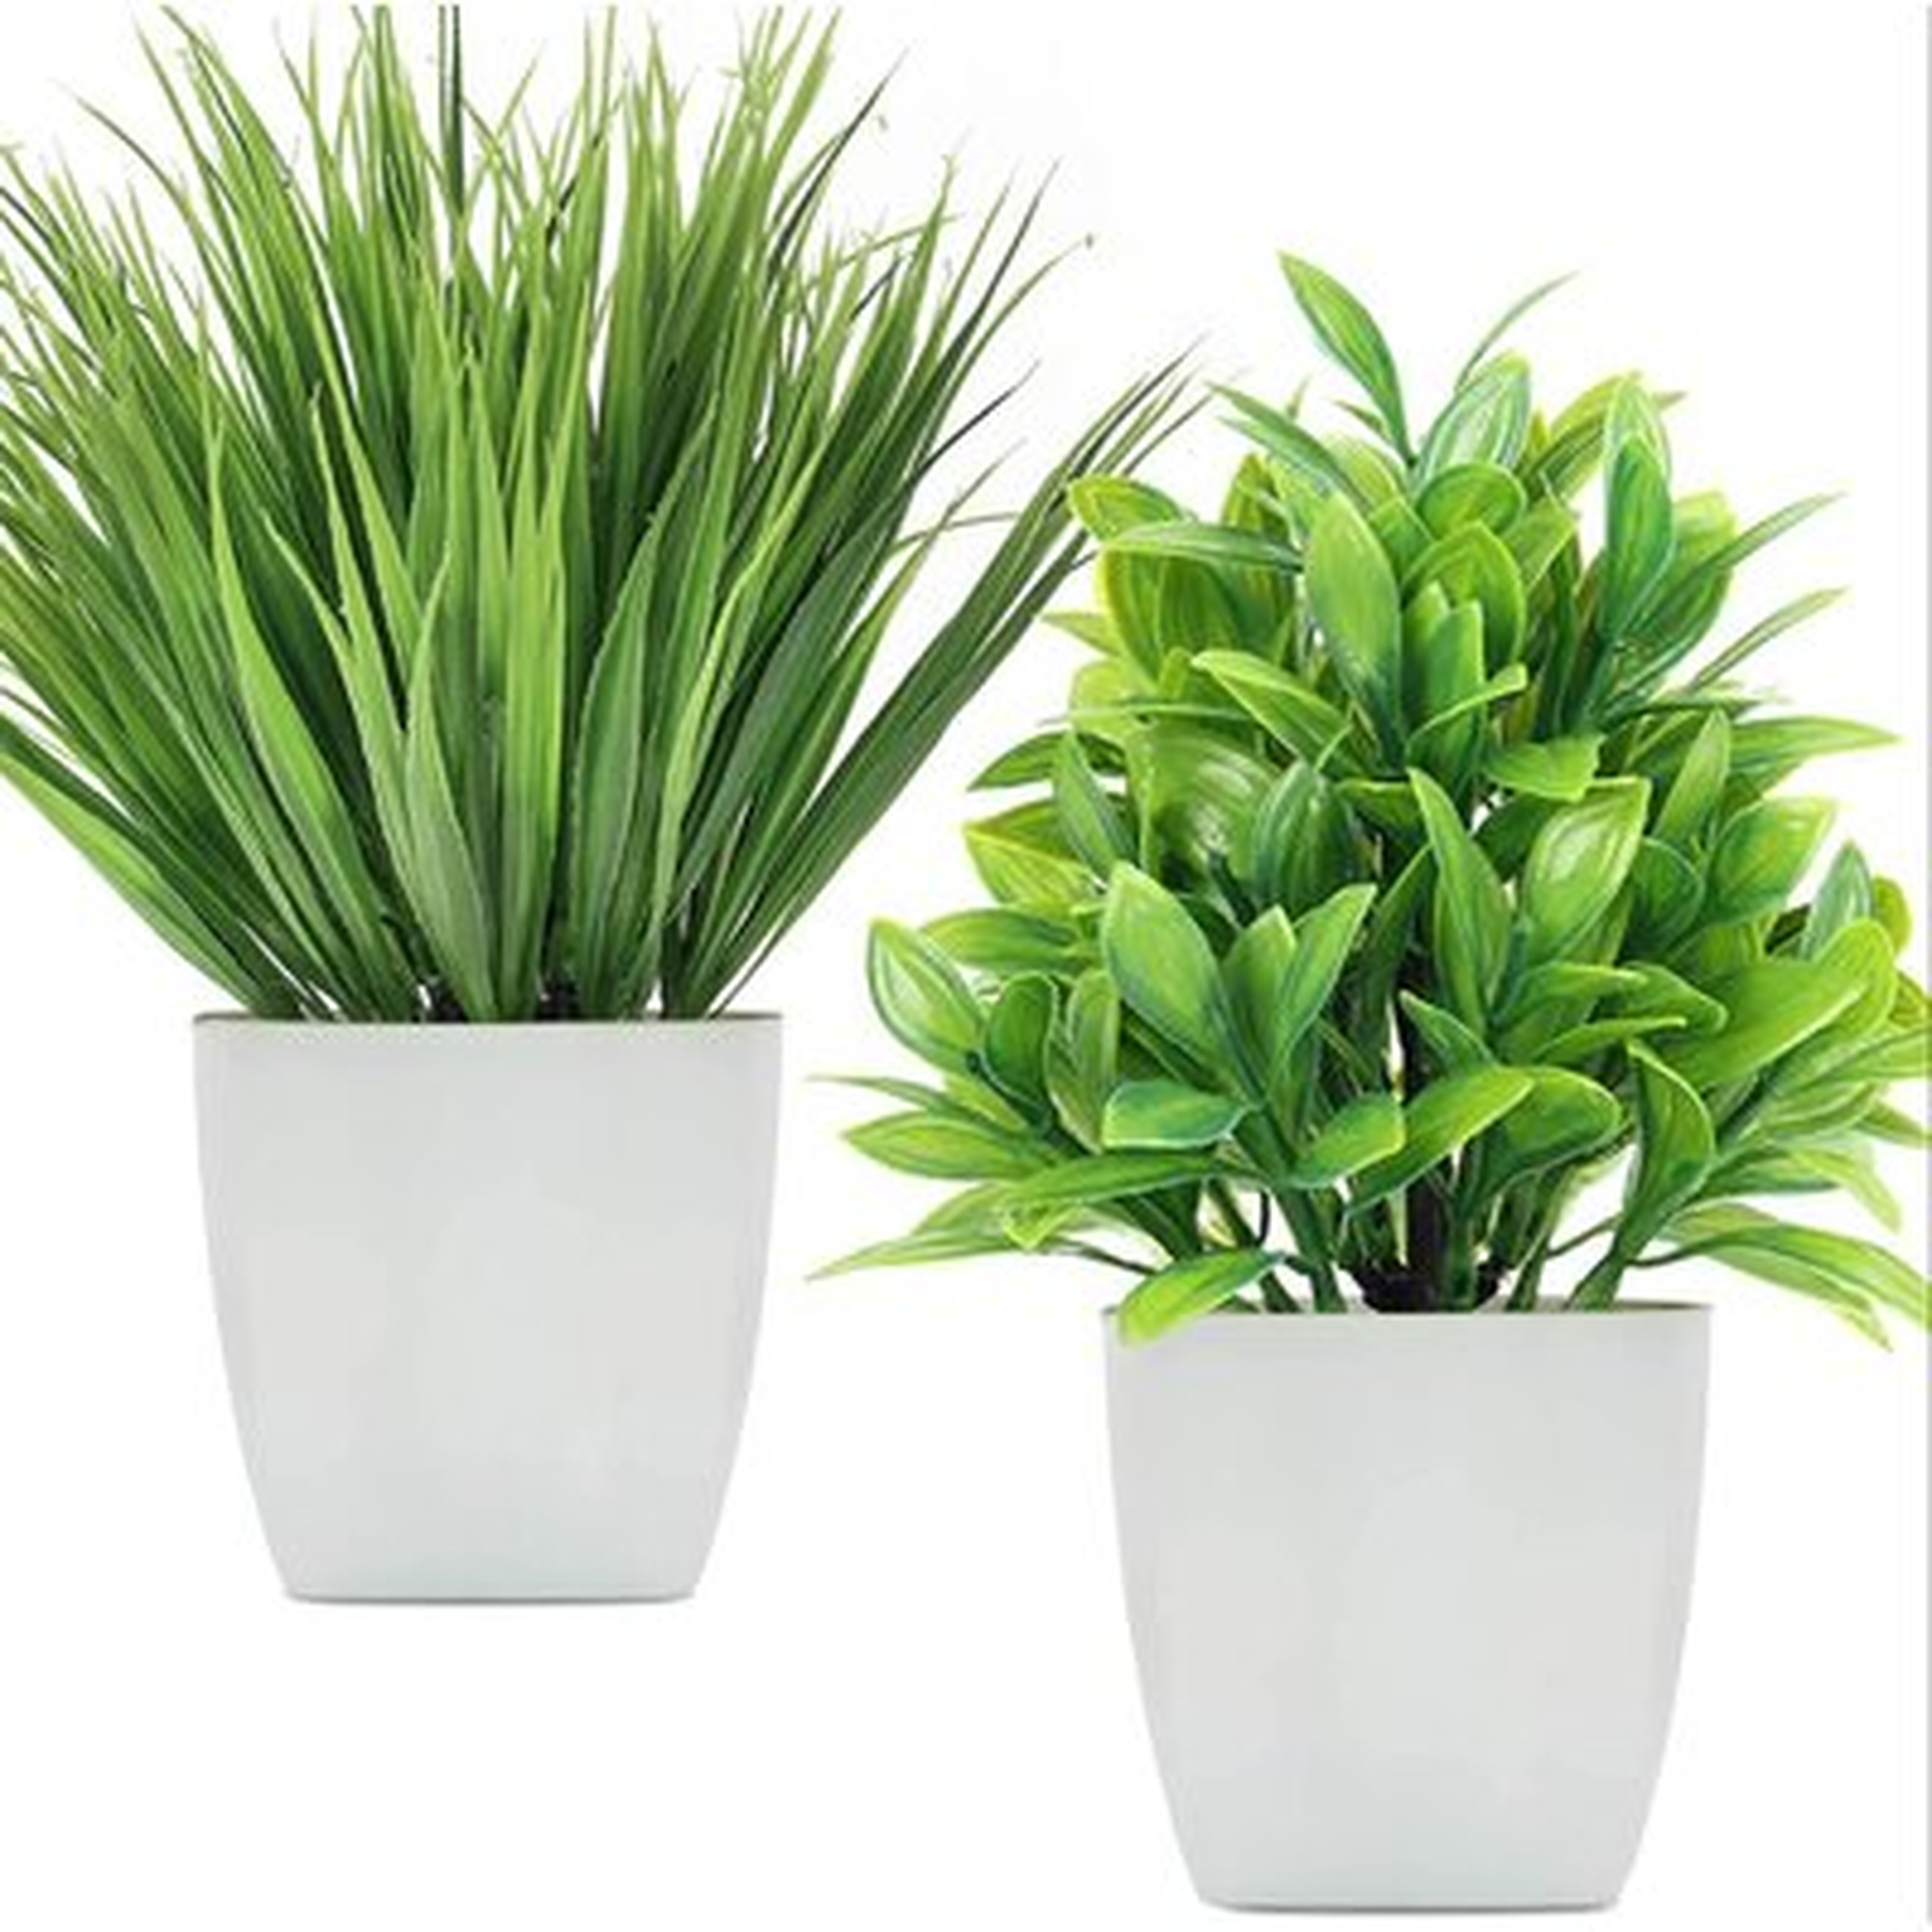 Artificial Potted Plants Mini Fake Plants, Small Eucalyptus Potted Faux Decorative Grass Plant With White Pot For Home Decor, Indoor, Office, Desk, Wedding Decoration - Wayfair